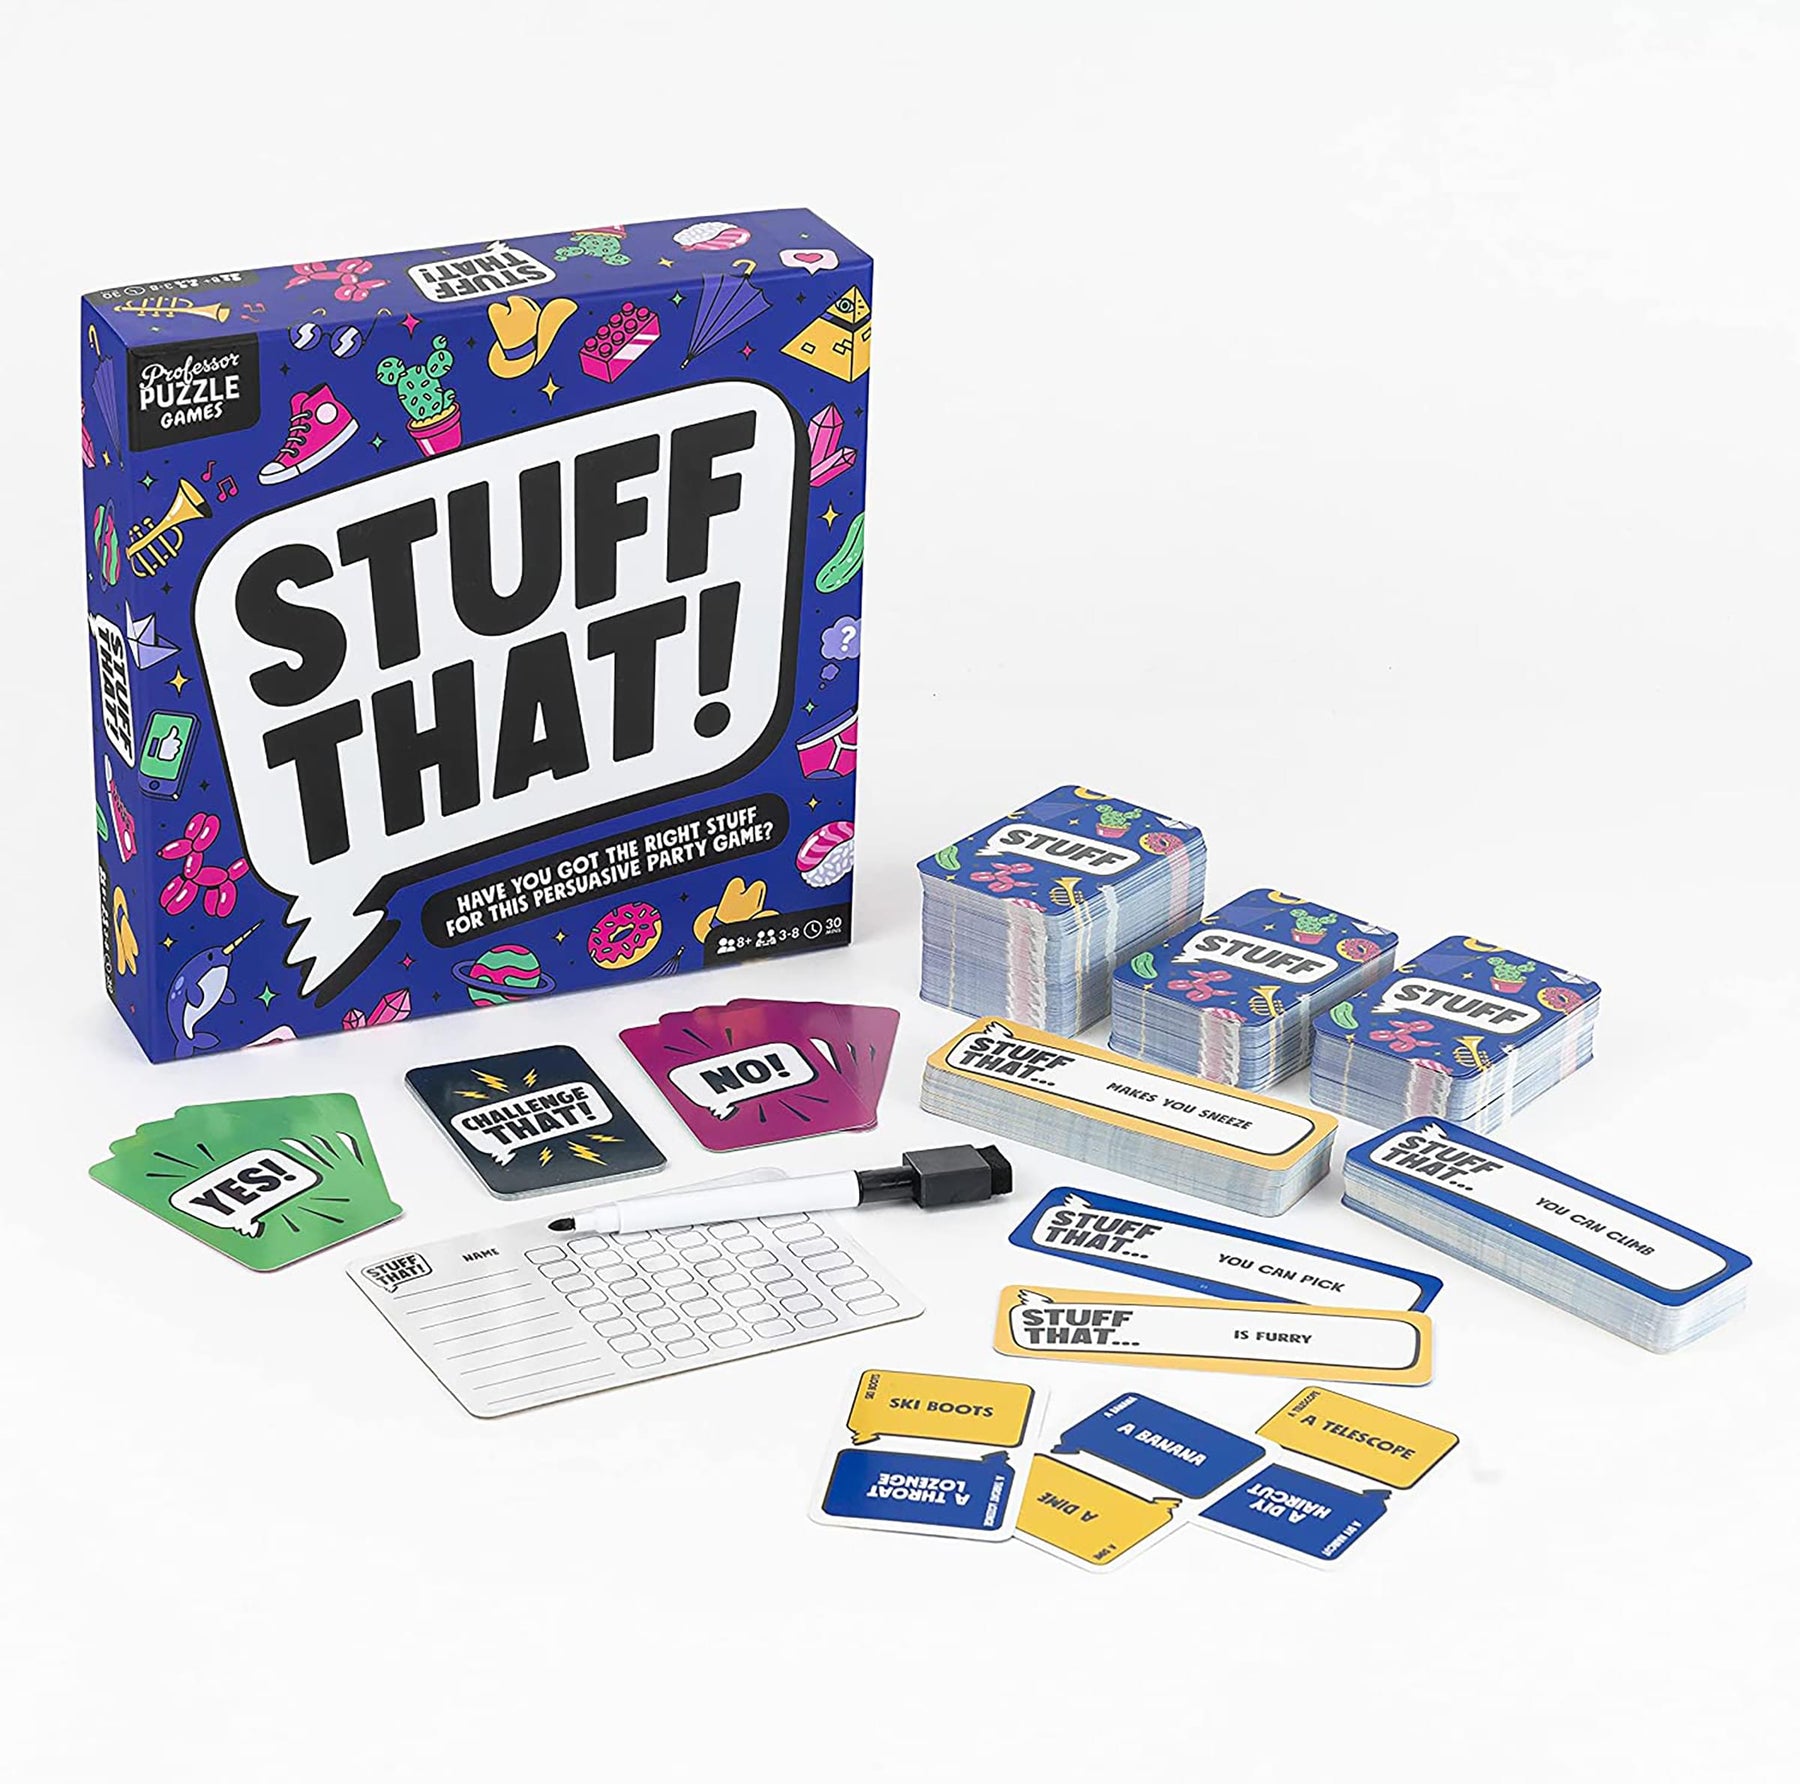 Stuff That! | Family Friendly Card Game of Creative Thinking / Bluffing